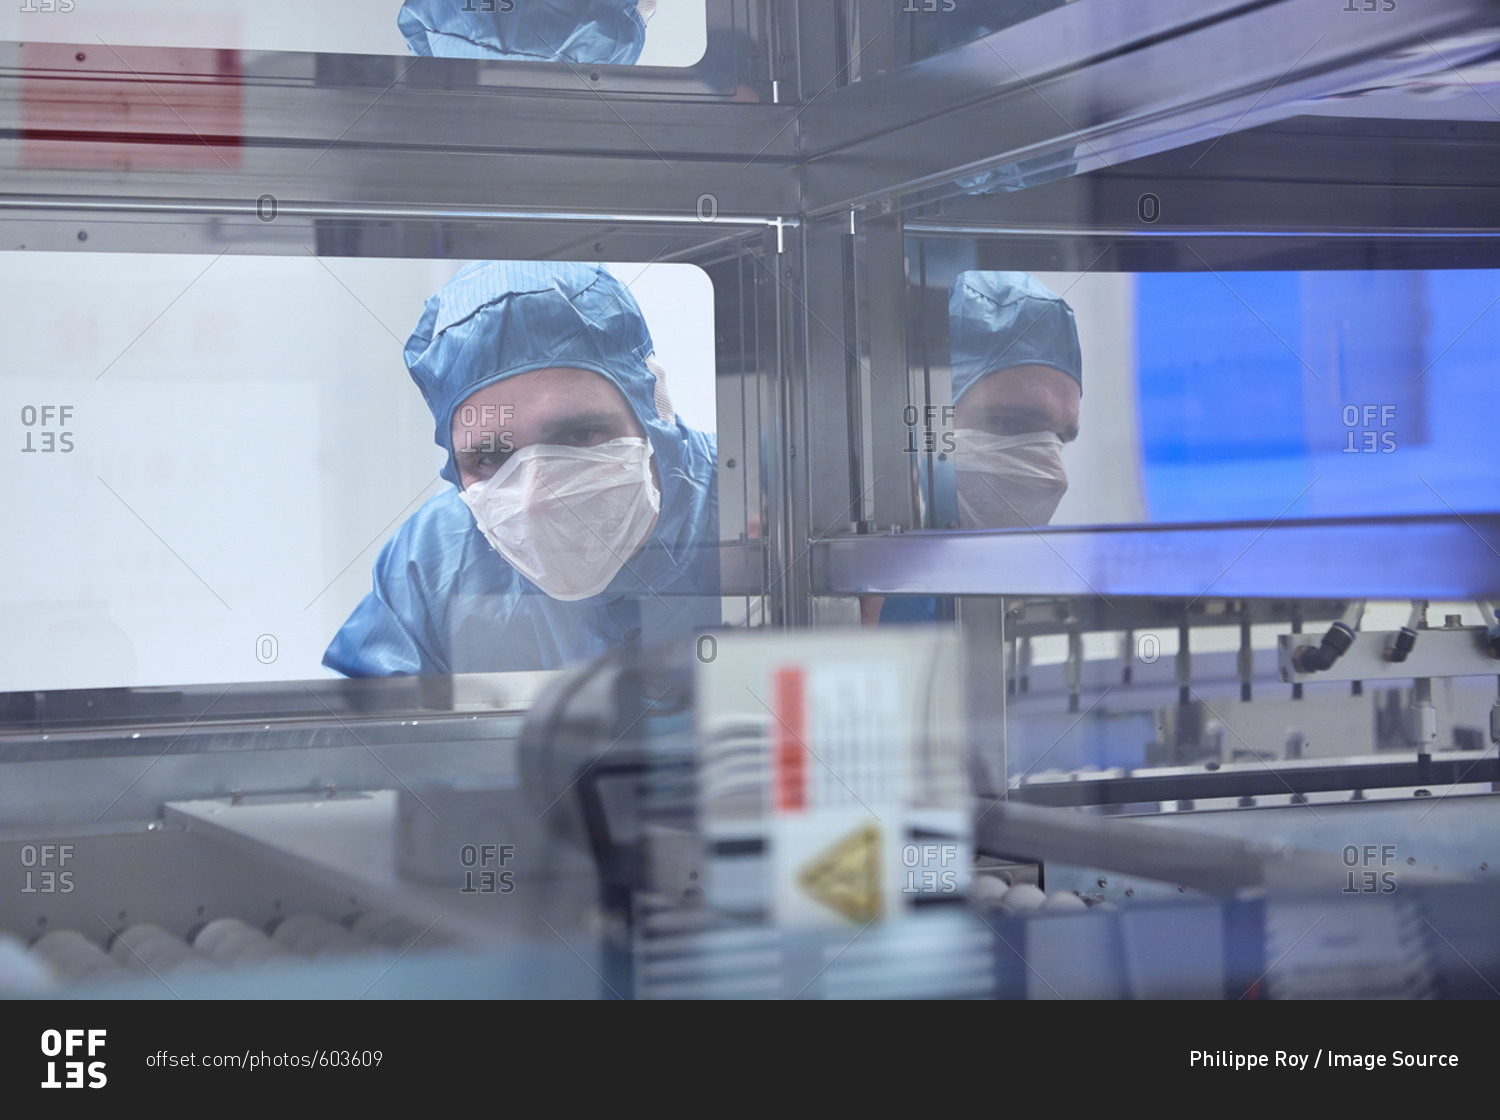 Male worker looking through machine window in flexible electronics factory clean room